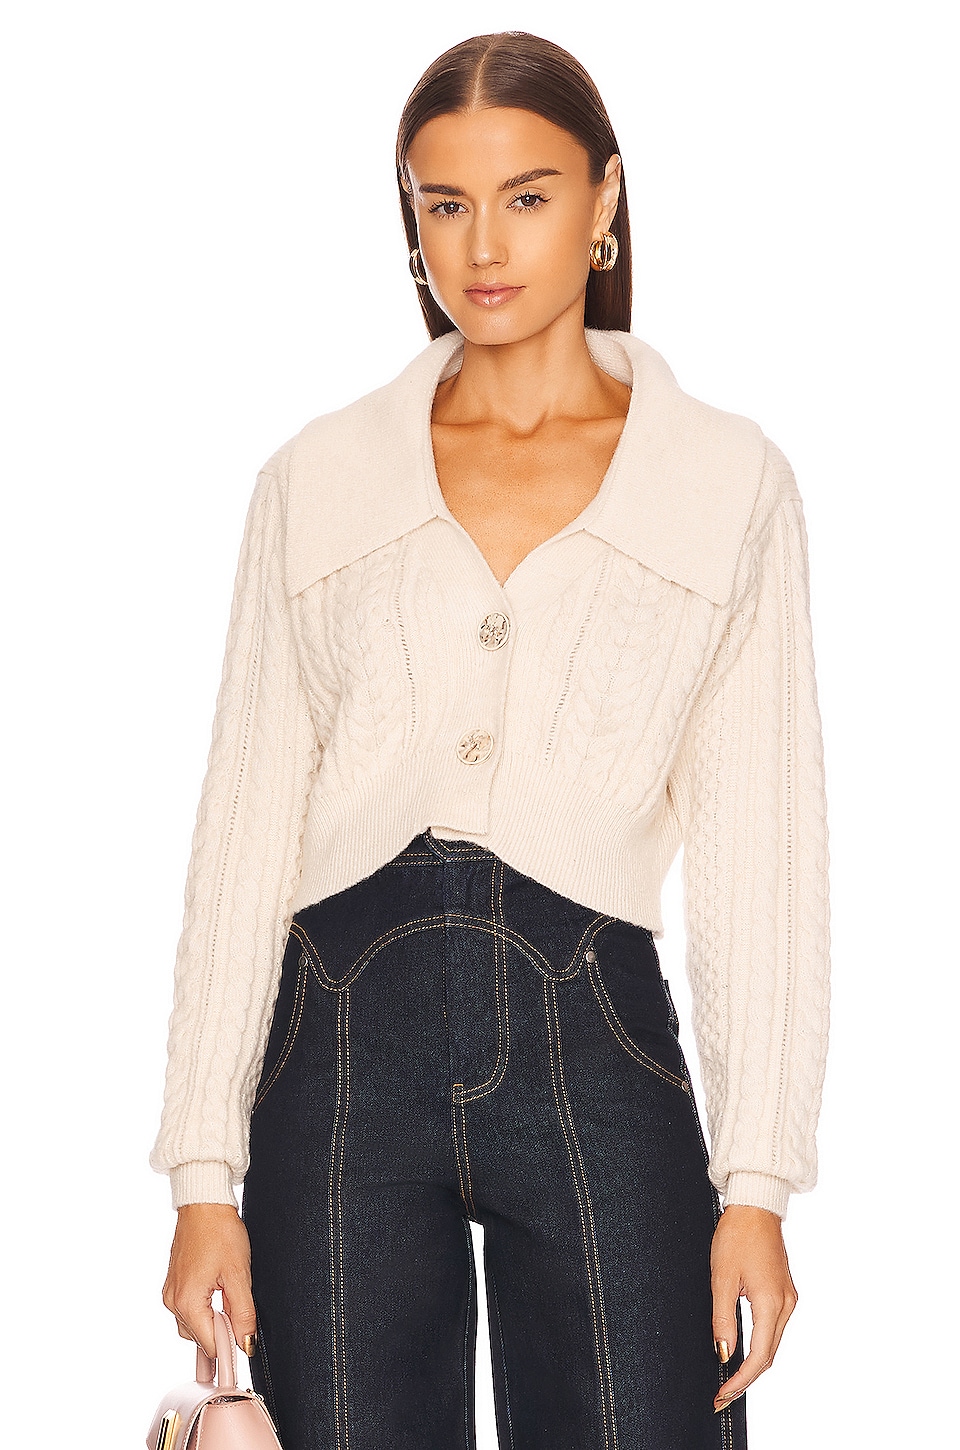 Magali Pascal Evie Cardigan in Ivory | REVOLVE